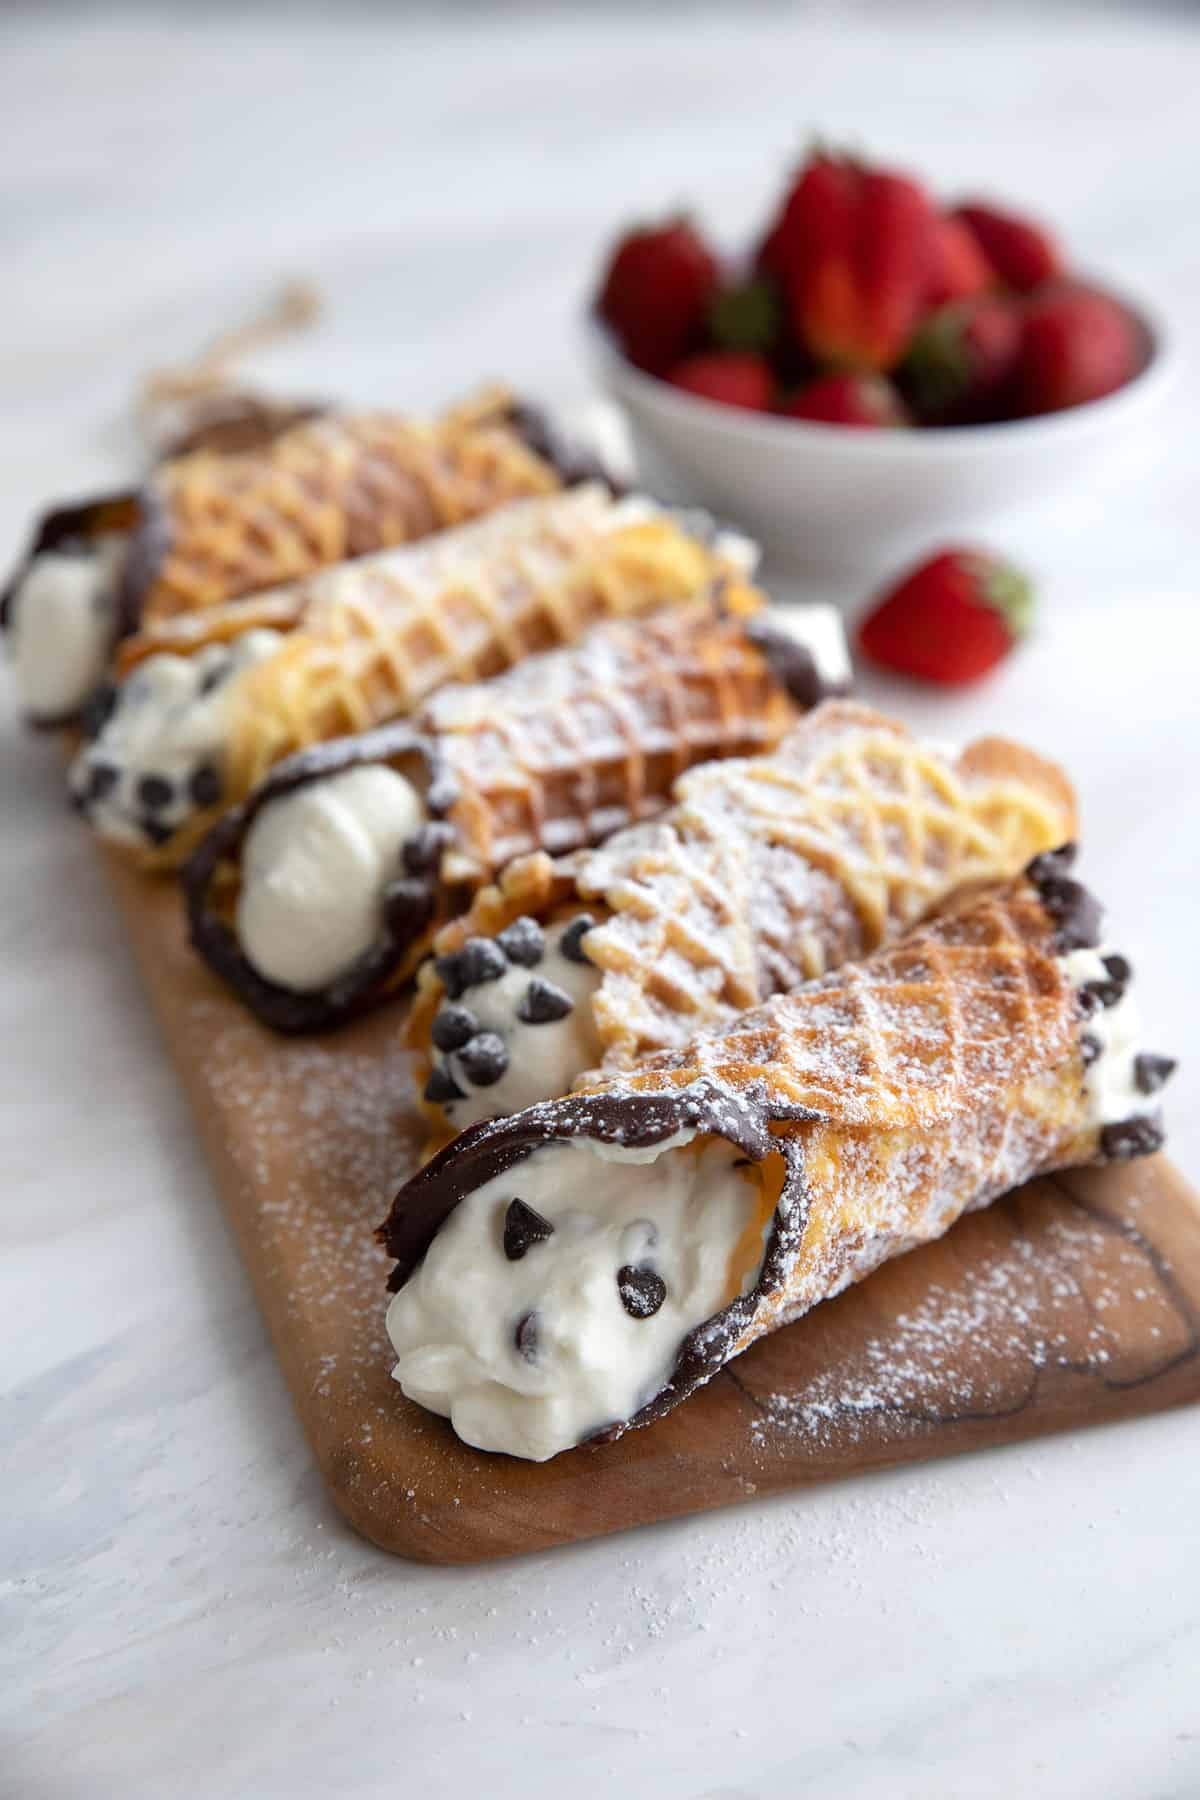 Keto cannoli made with pizzelle shells on a wooden cutting board.